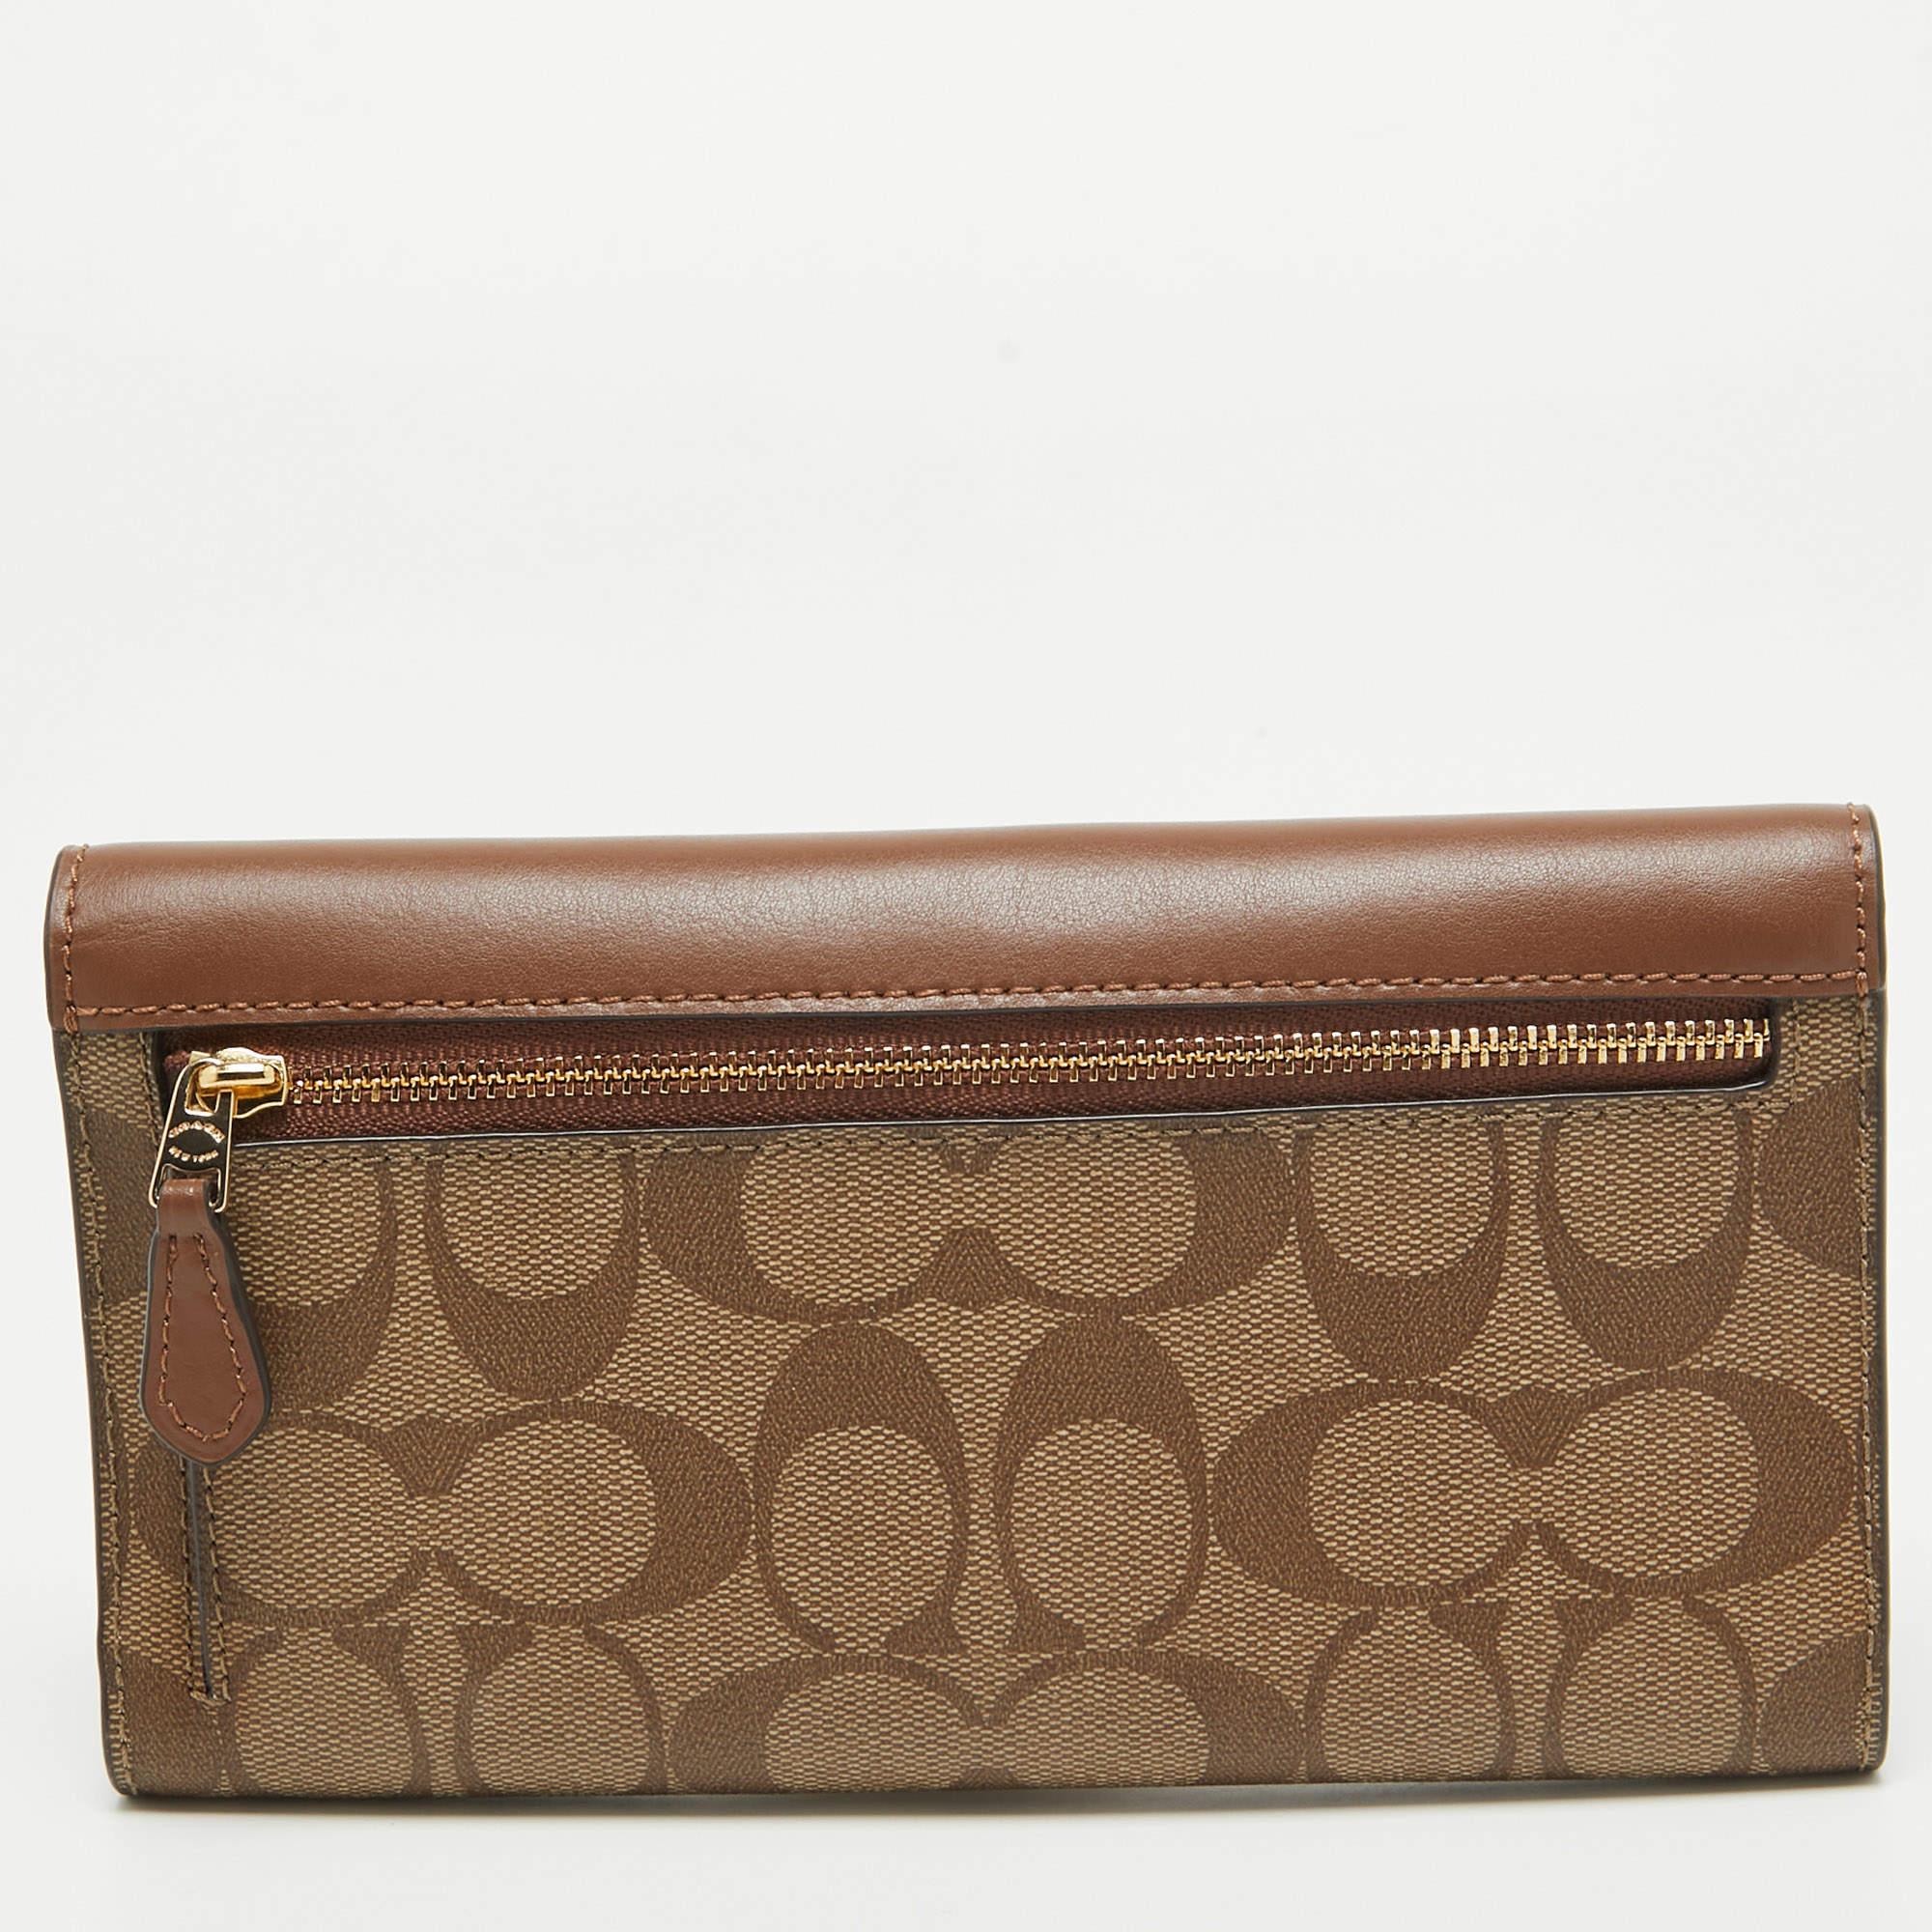 Coach Brown/Beige Signature Coated Canvas and Leather Trifold Long Wallet en vente 3